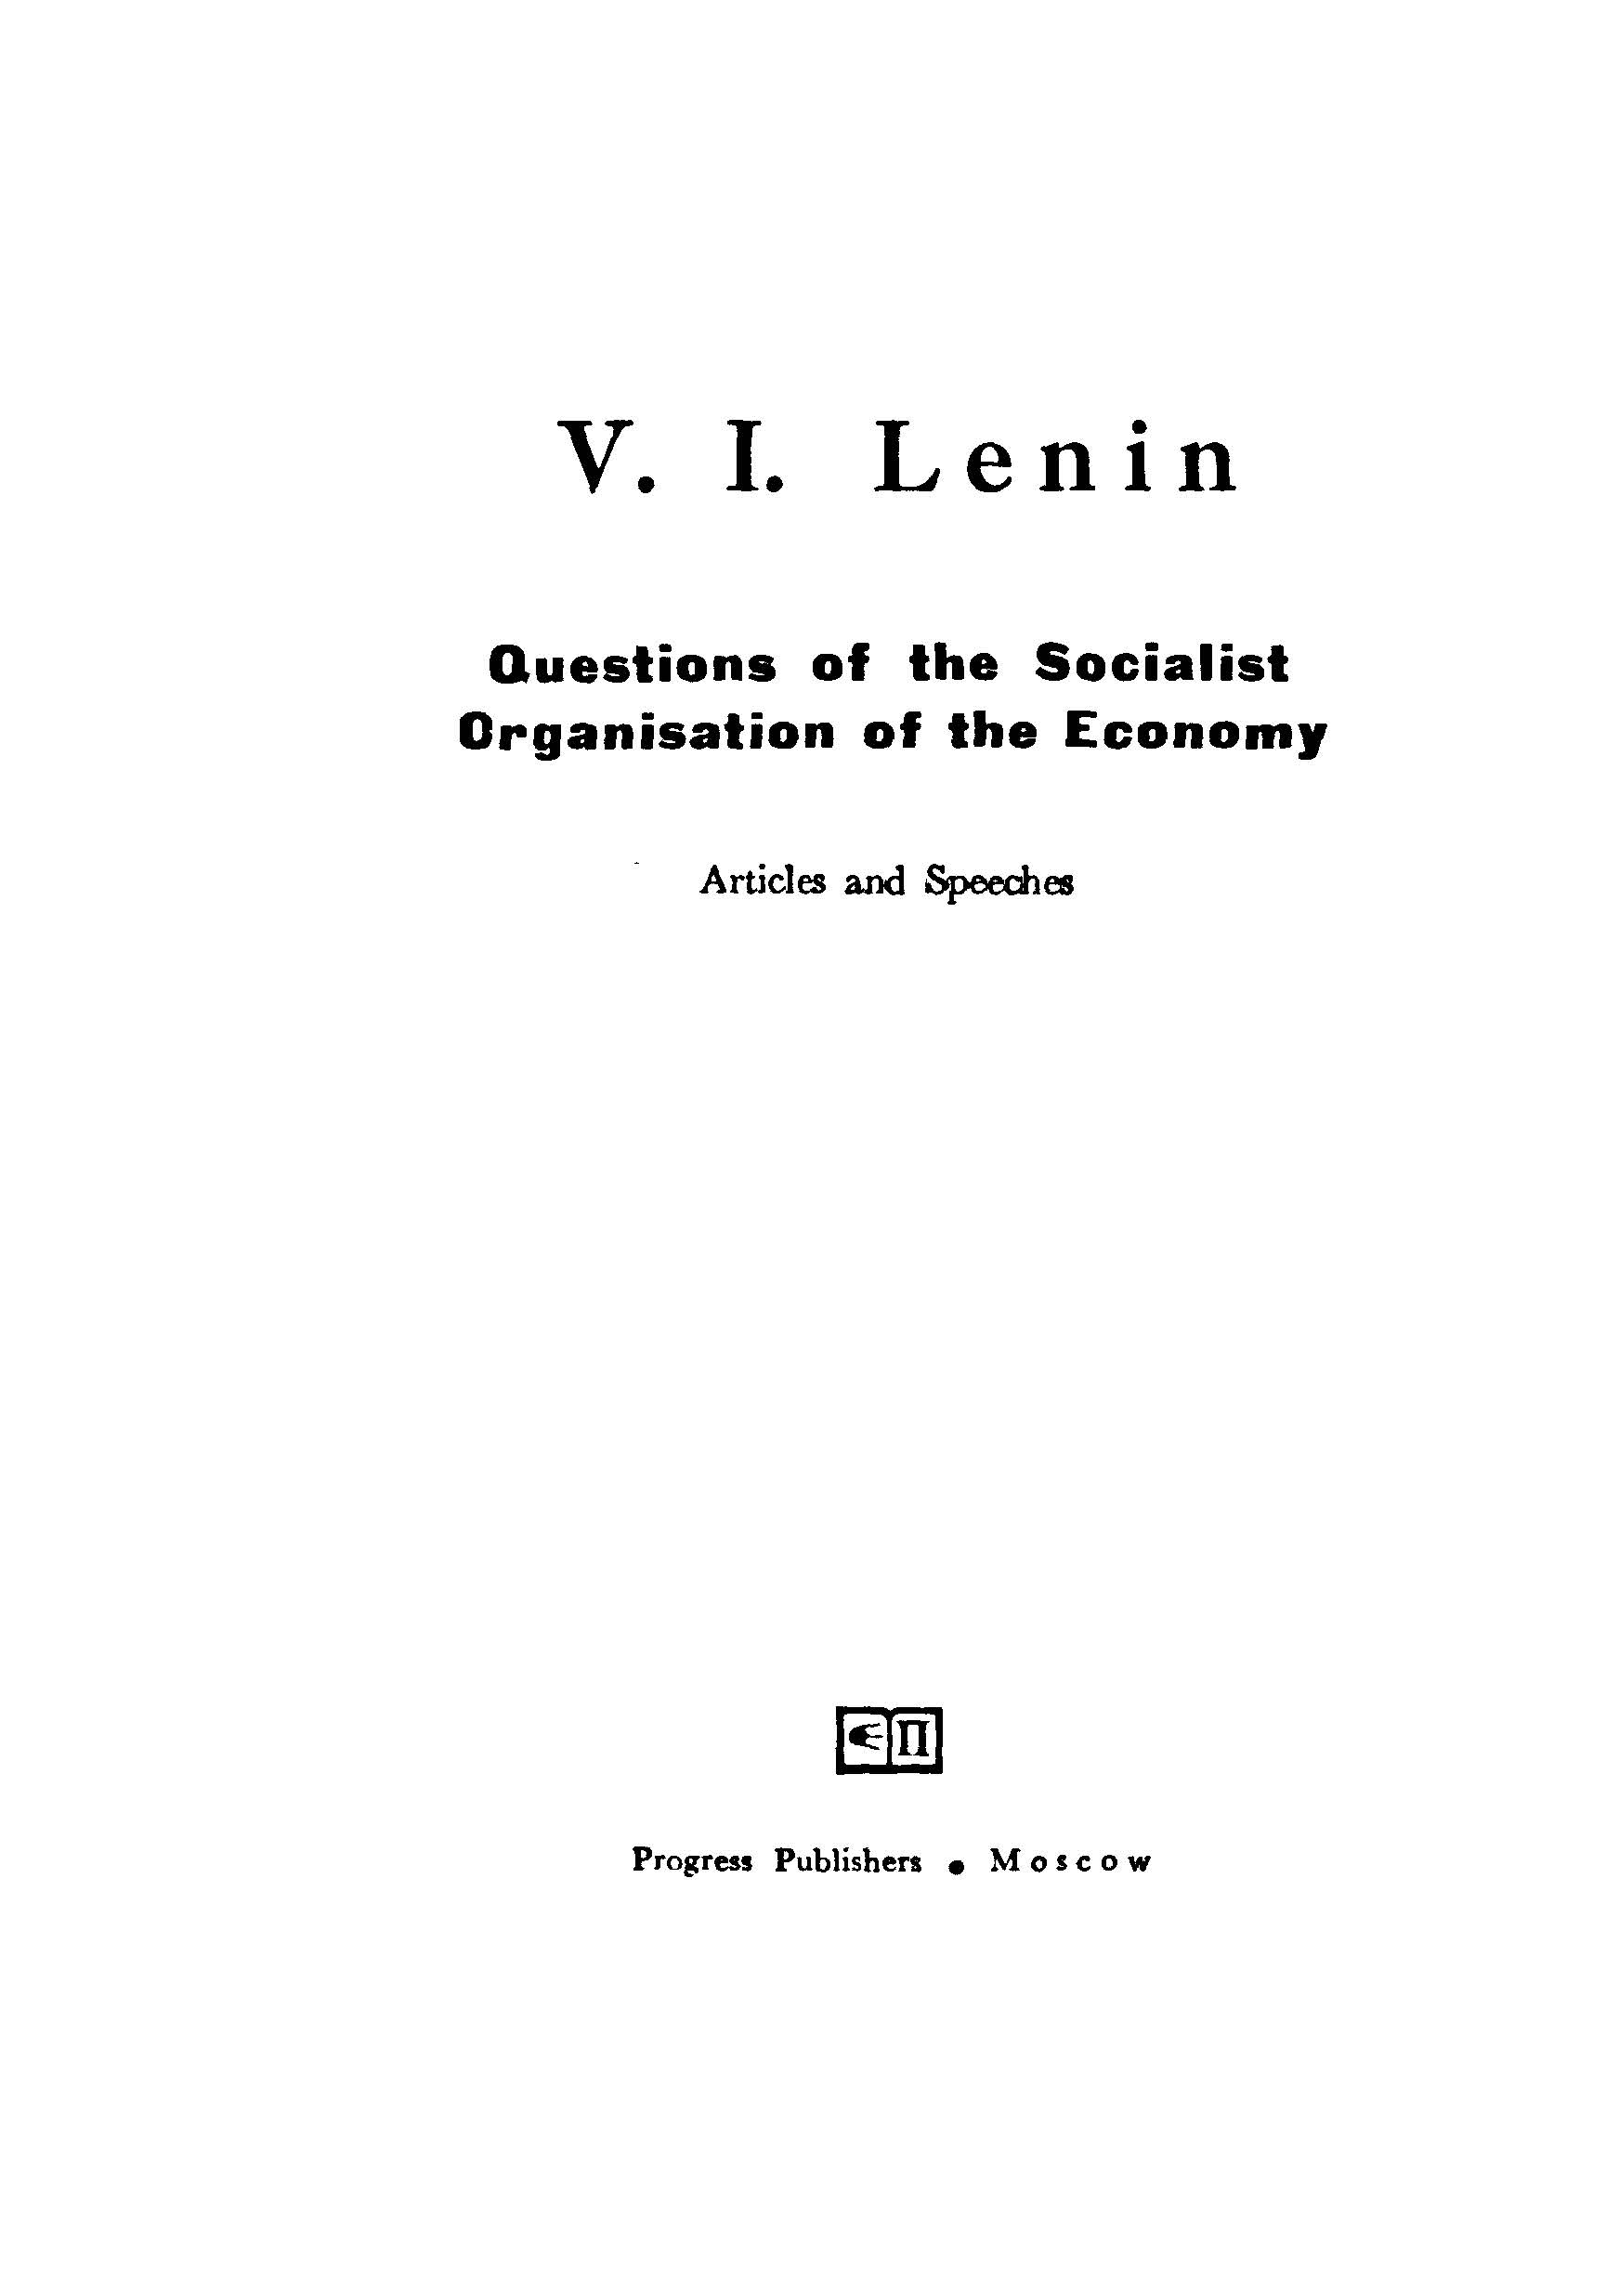 V.L.Lenin questions of the socialist organisation of the economy